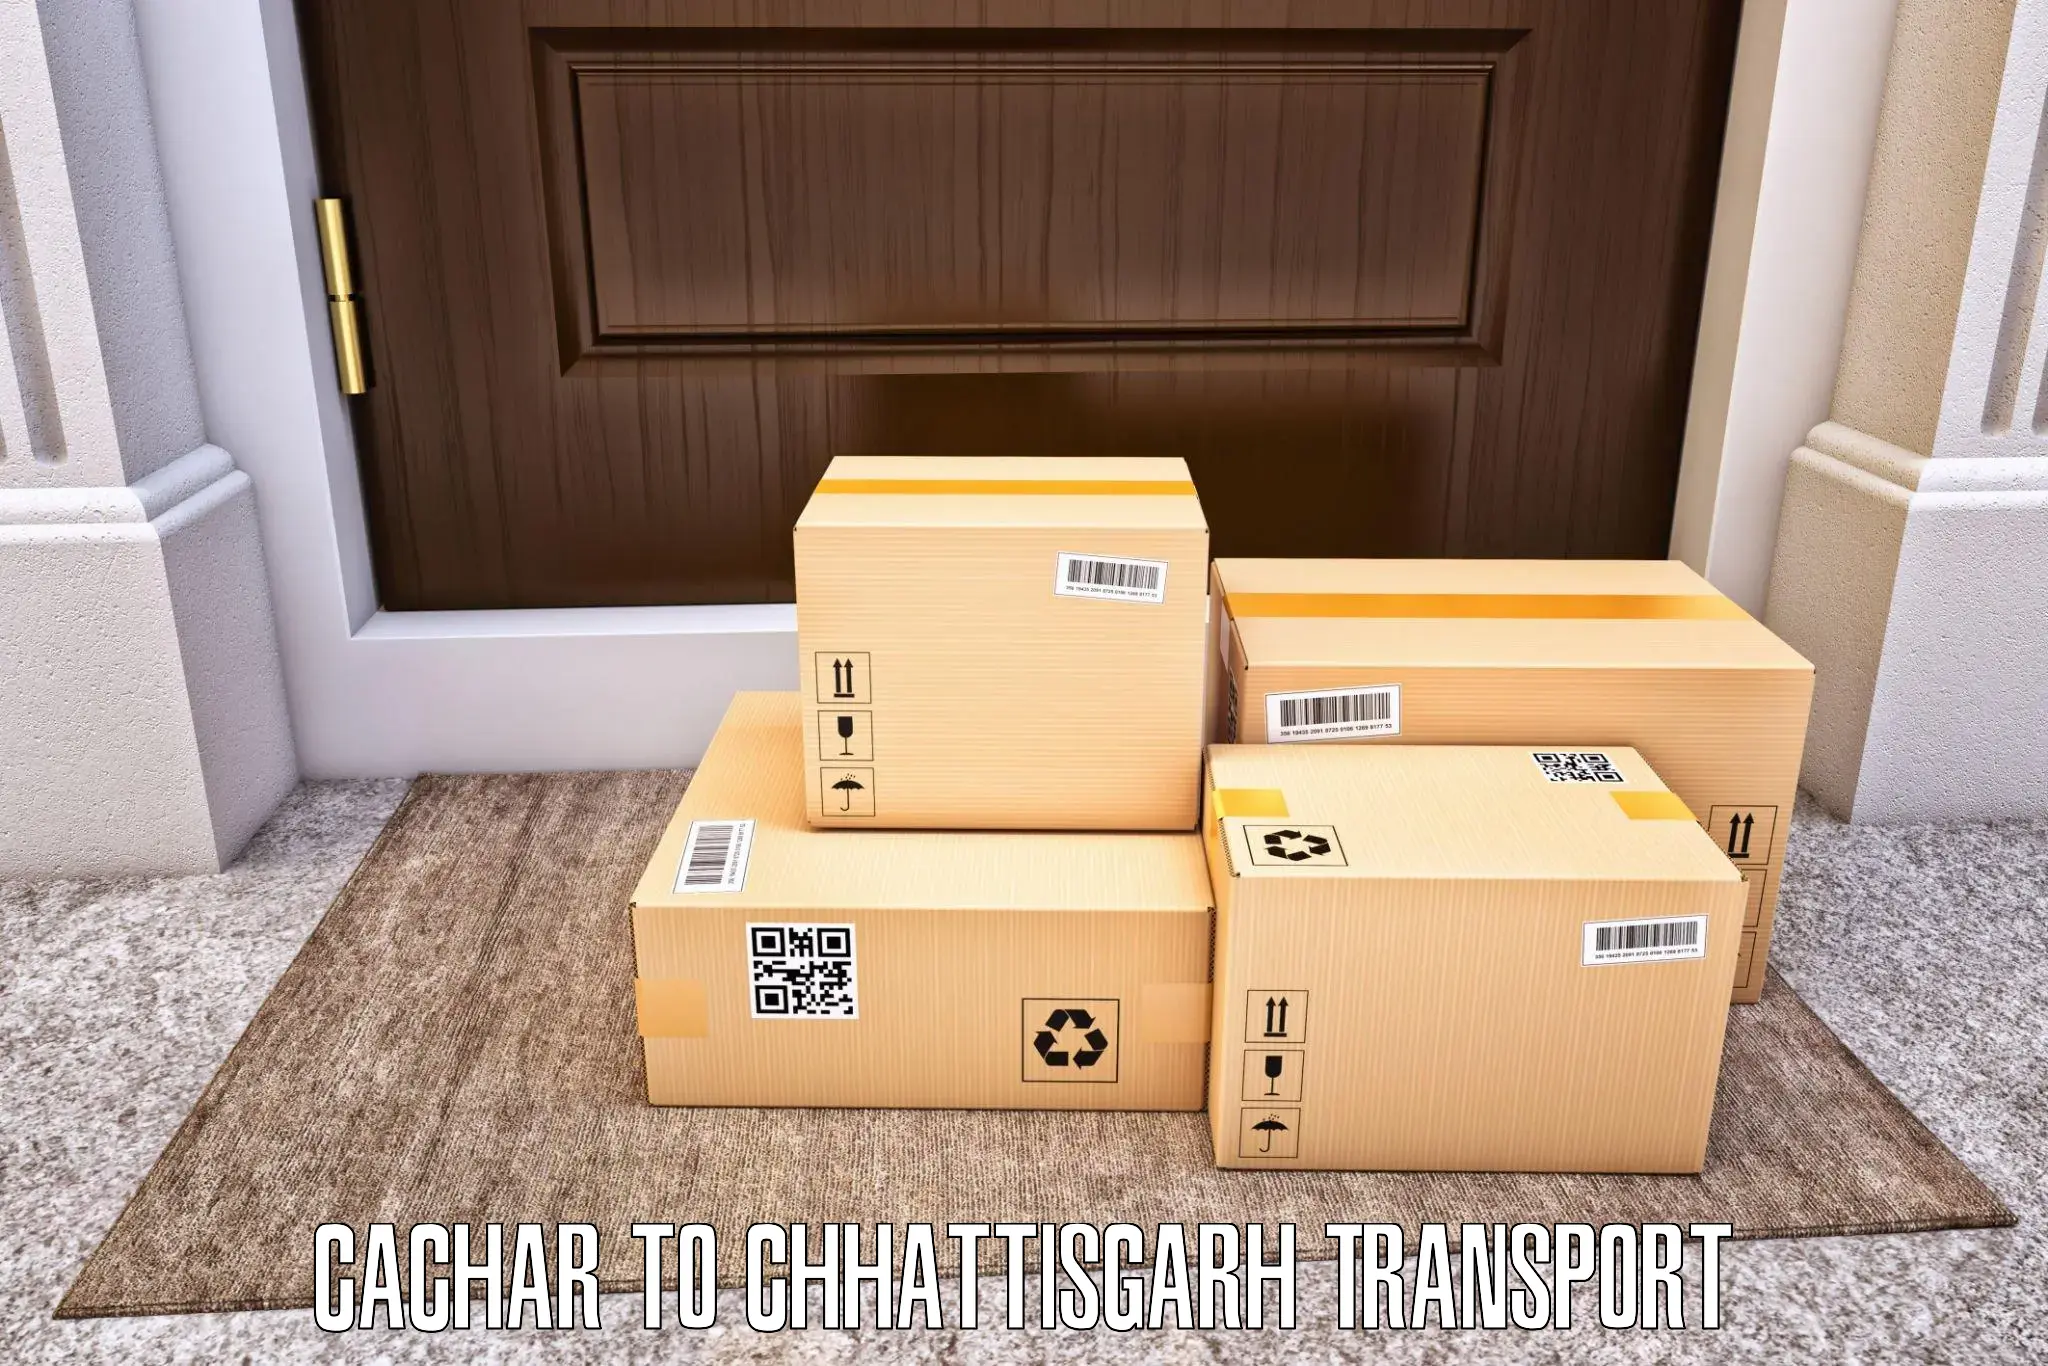 Road transport online services Cachar to Surguja